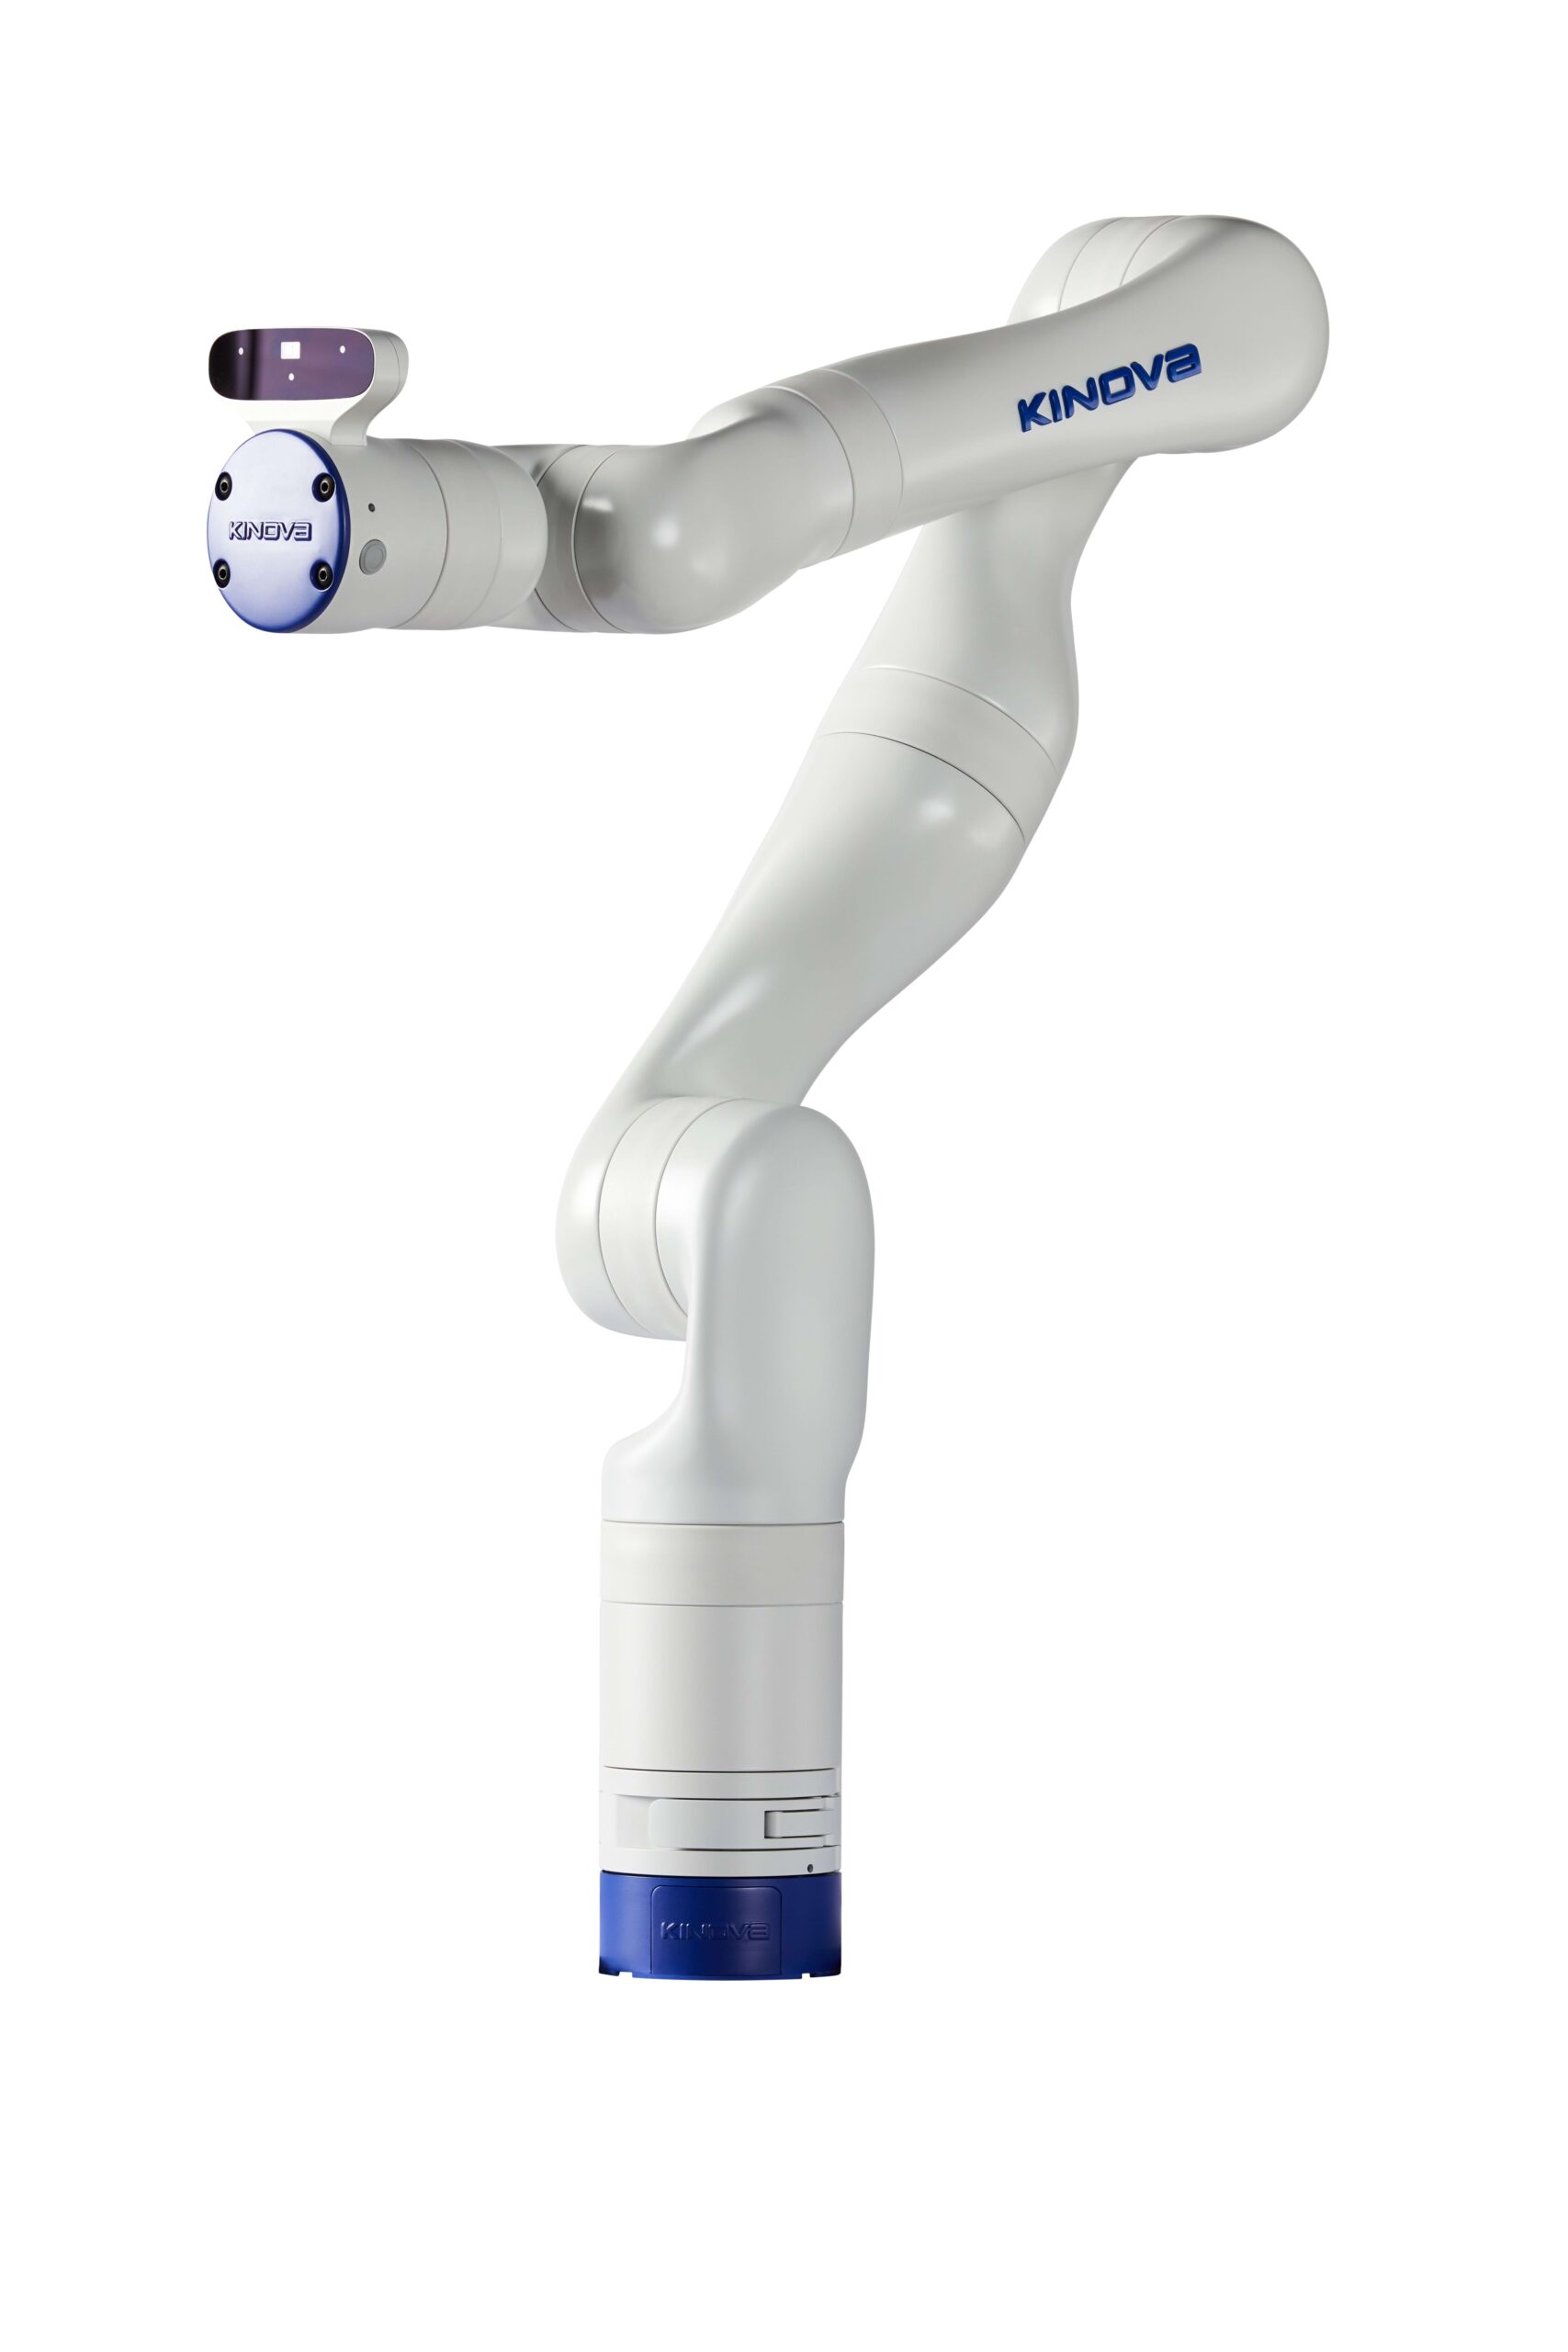 A white robotic arm with the name Kinova on the side.